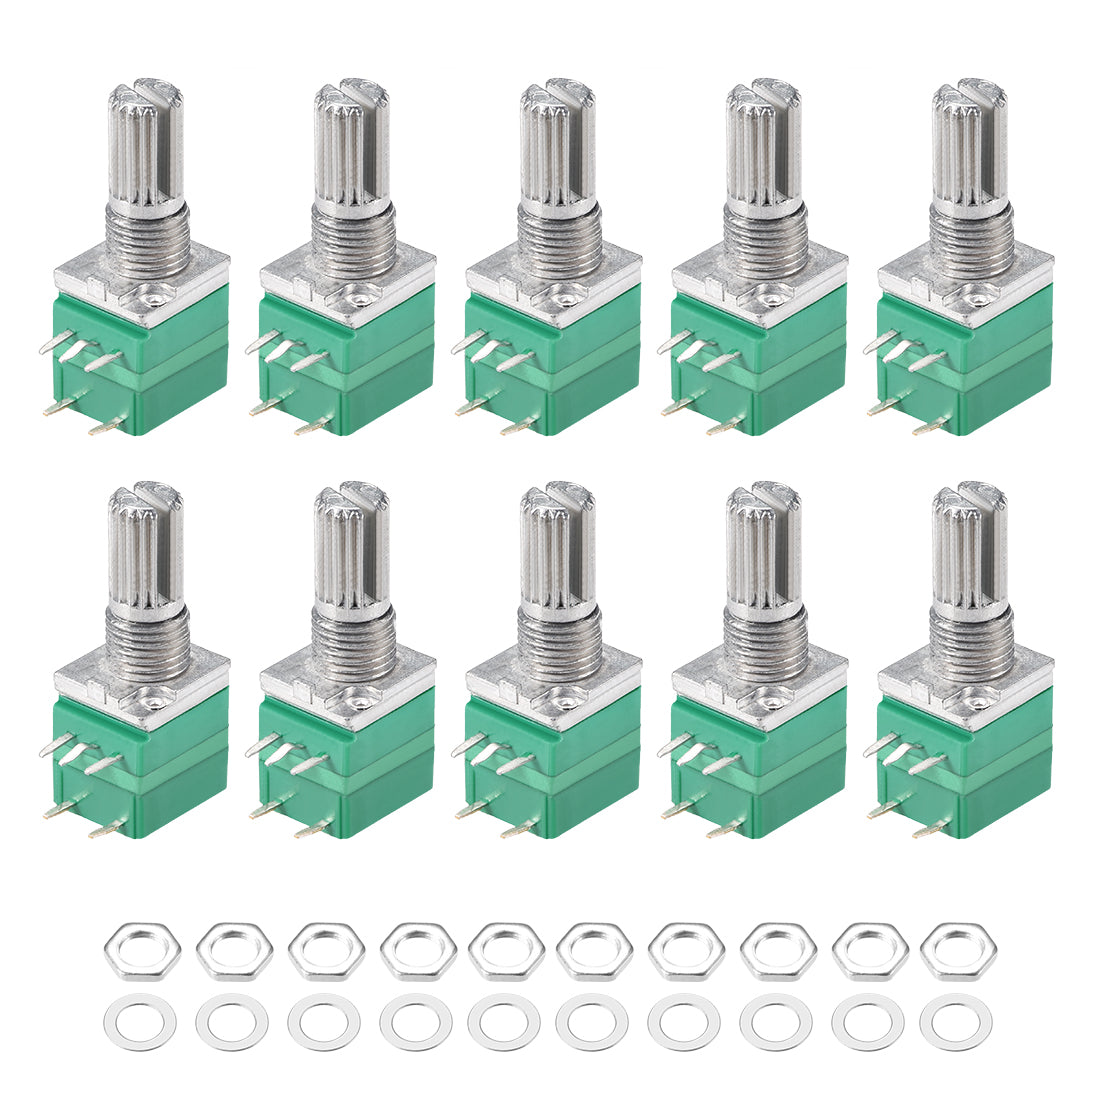 uxcell Uxcell Potentiometer With Switch  B20K Ohm Variable Resistors Single Turn Rotary Carbon Film Taper RV097NS 10pcs